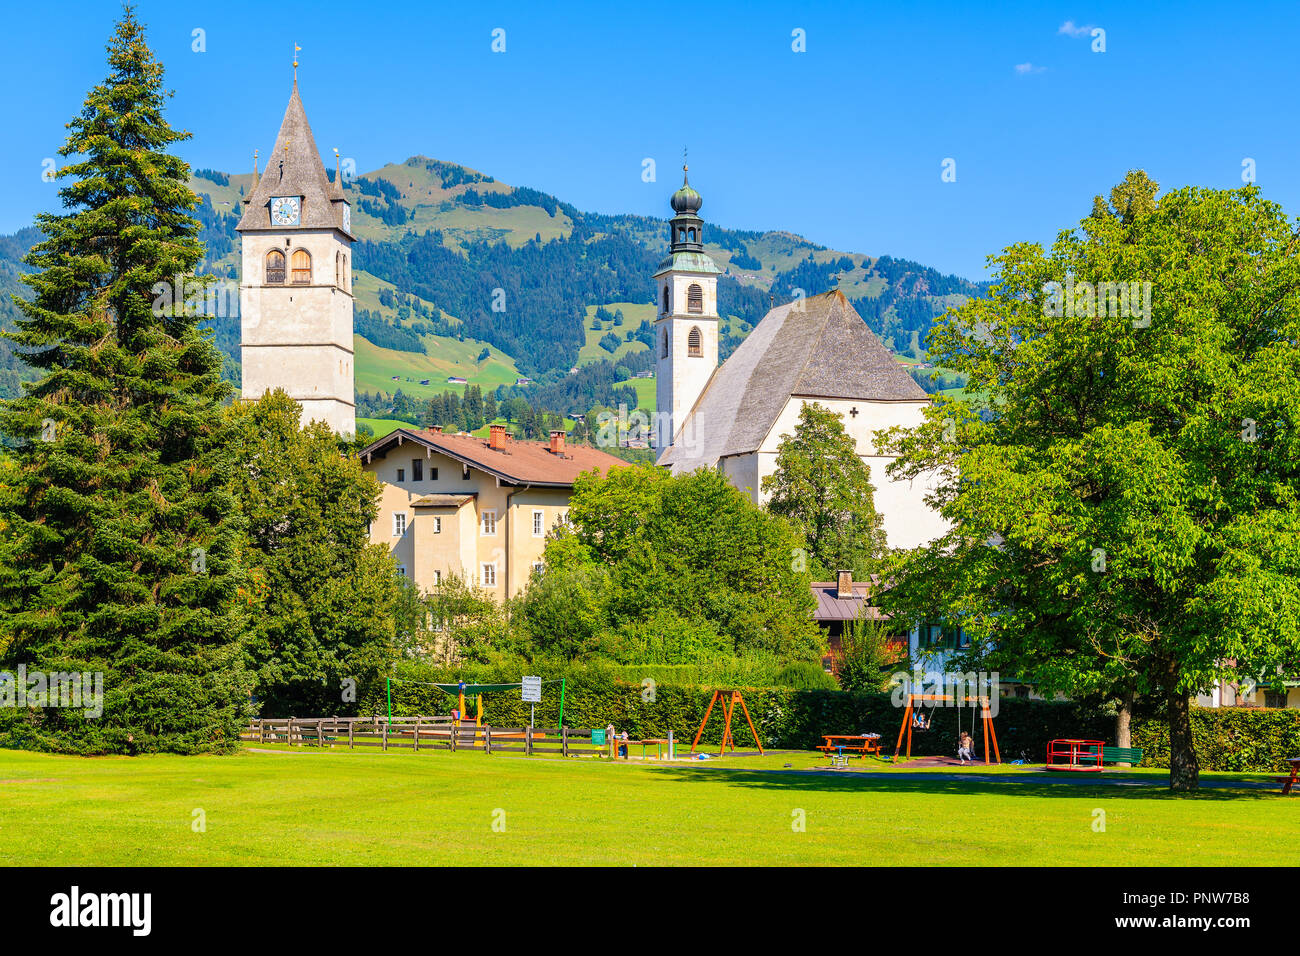 KITZBUHEL TOWN, AUSTRIA - JUL 30, 2018: Church towers in Kitzbuhel town park against sunny blue sky in summertime. It is one of the most famous Austri Stock Photo